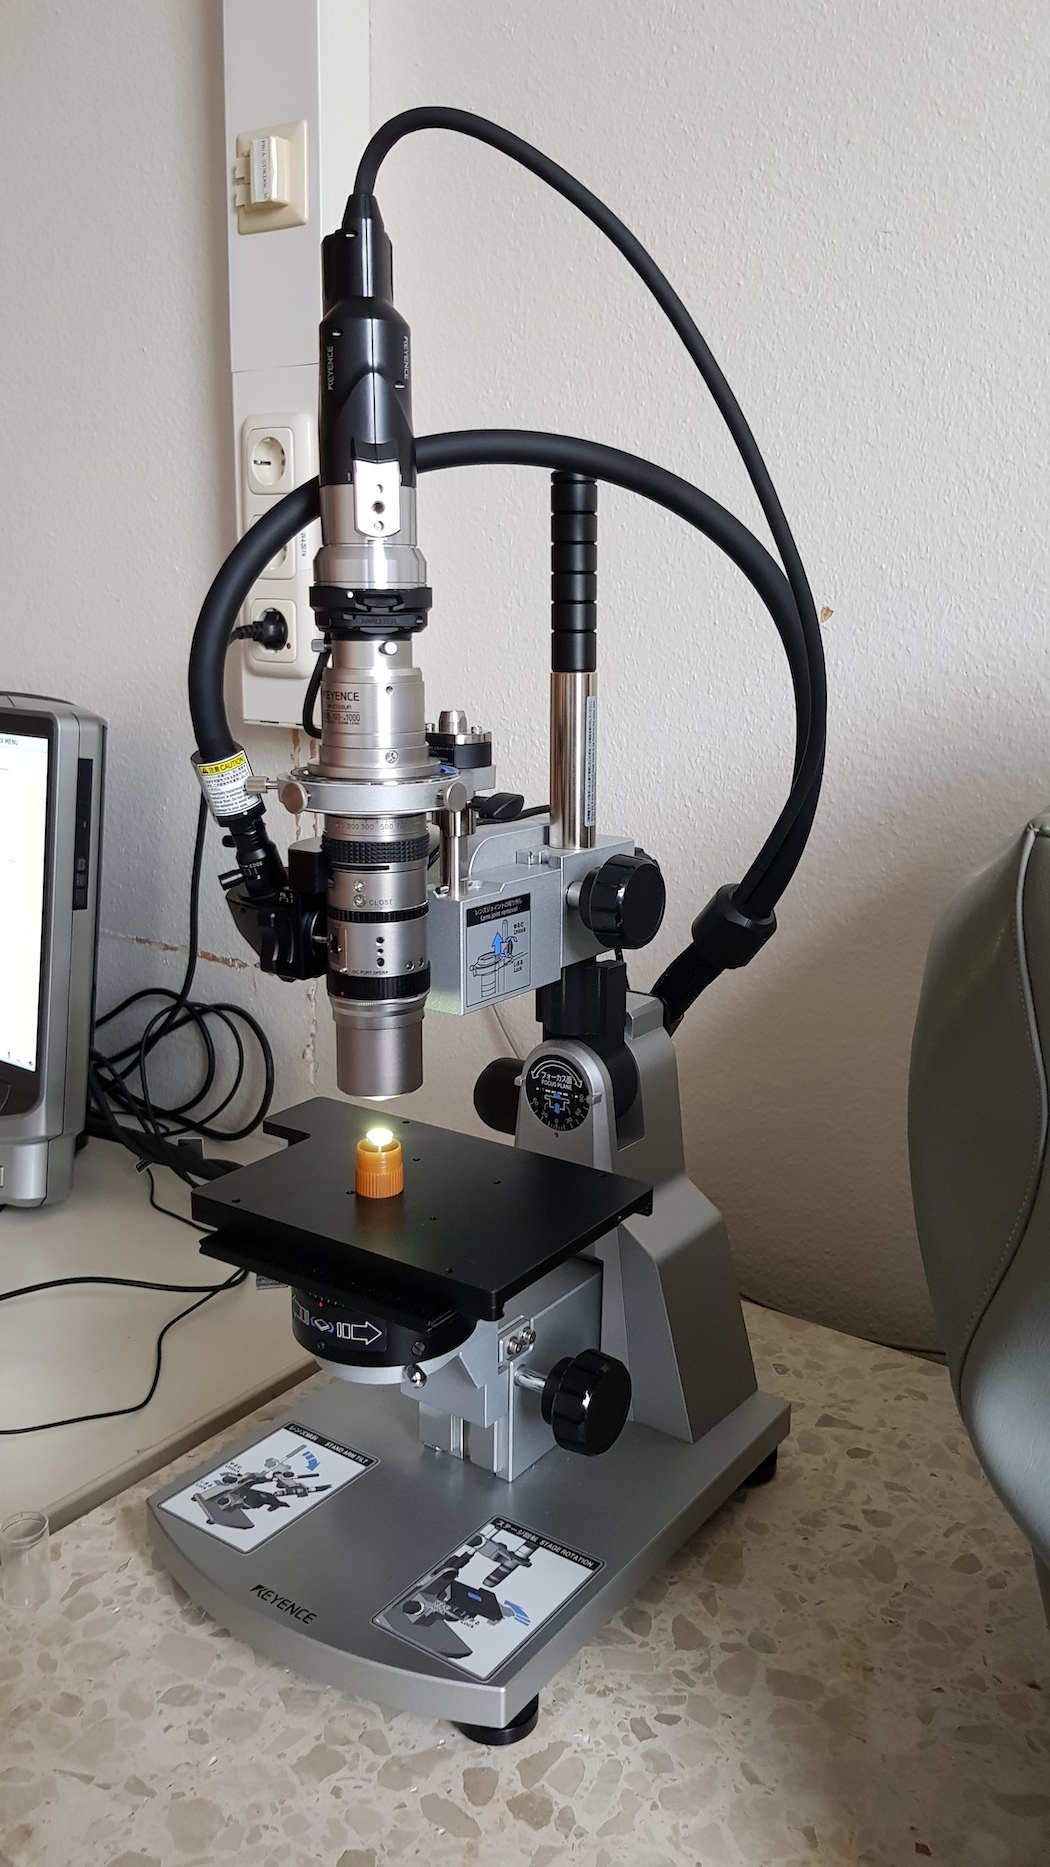 Photo of an incident light microscope